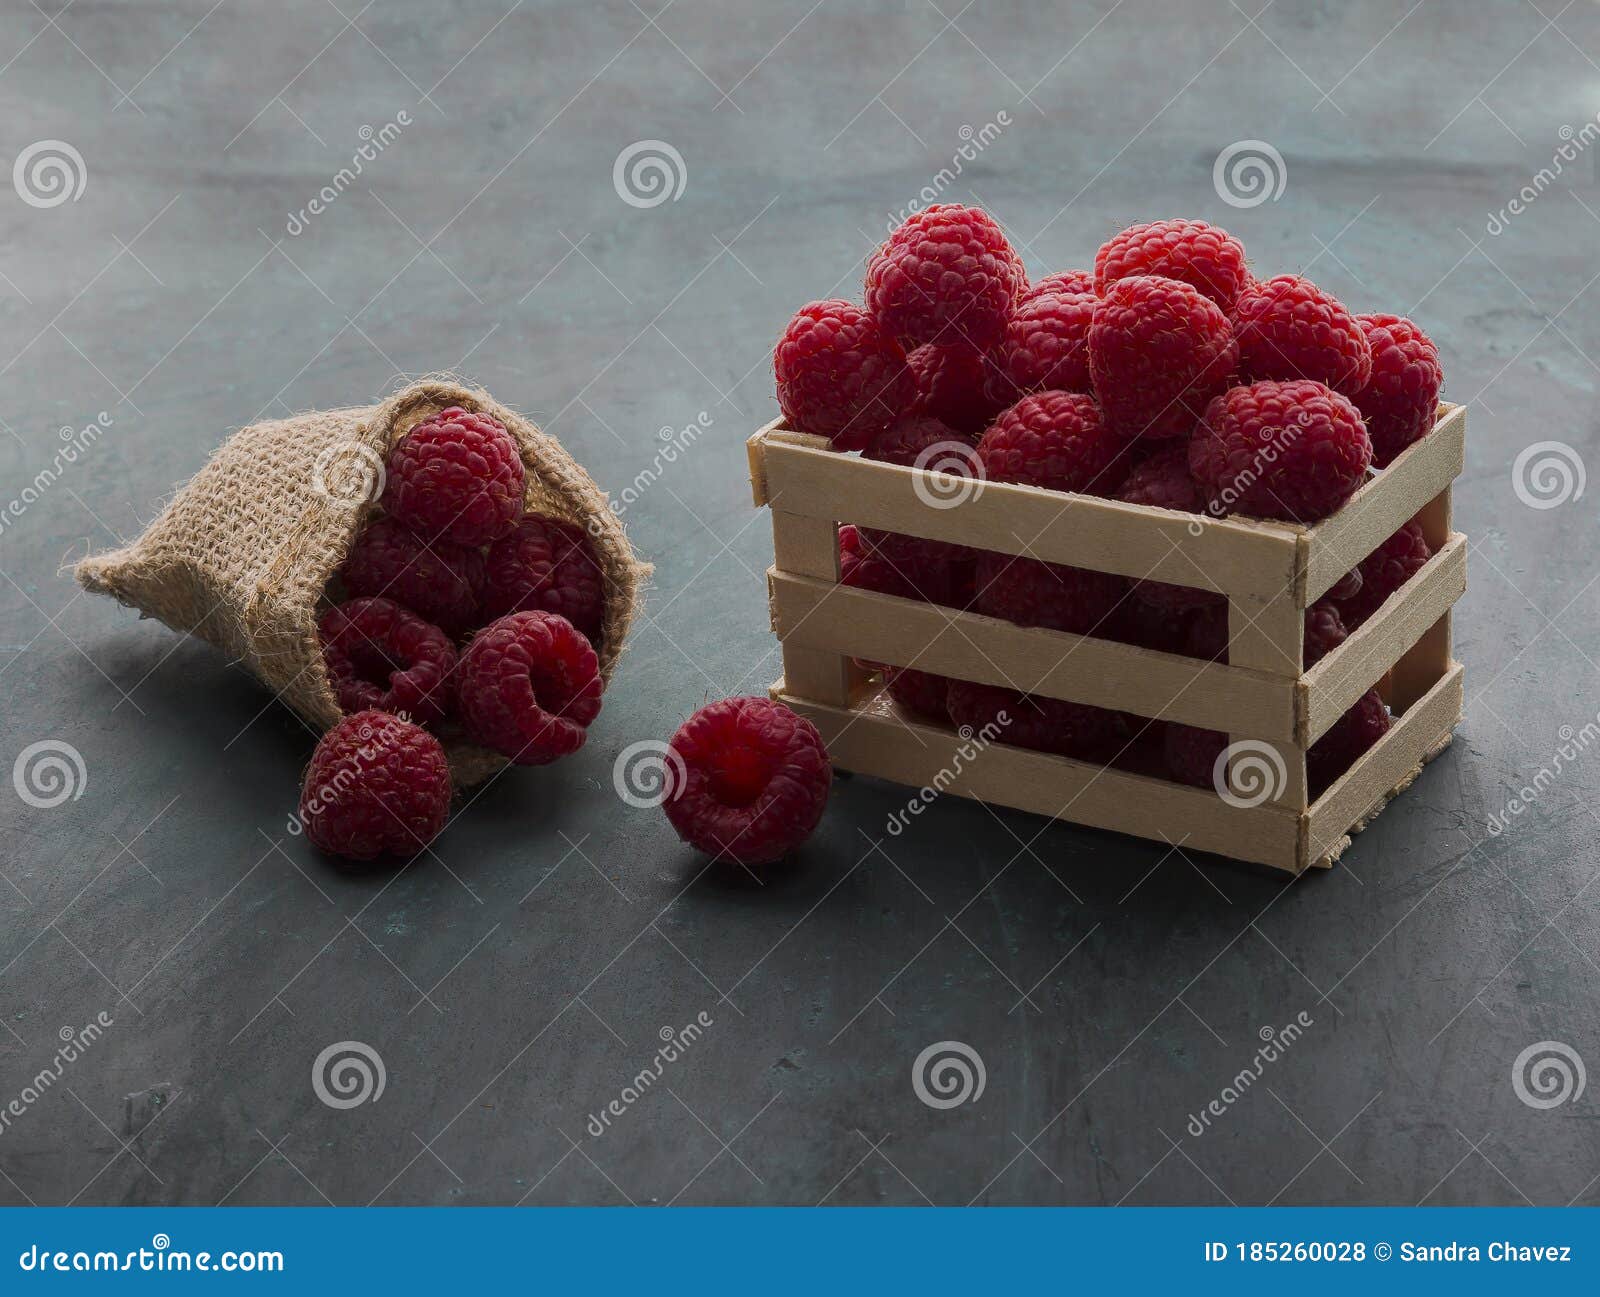 red raspberries placed on a small wooden fence and jute bag